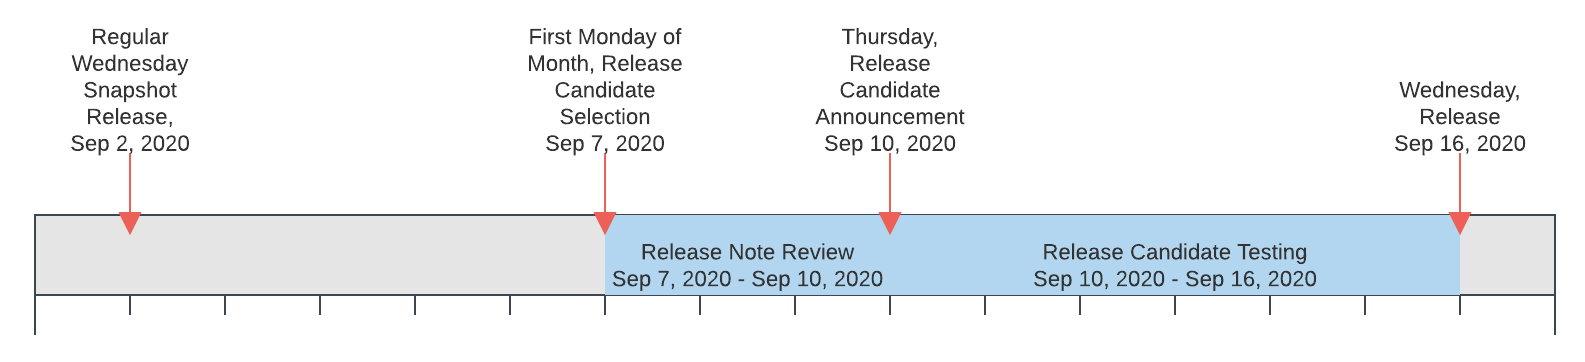 A typical release process timeline. A regular Wednesday snapshot release takes place on September 2. September 7 is the first Monday of the month, so release candidate selection takes place and the release candidate/ release notes review process begins. On September 10 the review process ends and release candidates are announced. Release candidate testing occurs from September 10 to September 16, and on Wednesday September 16 another release occurs.